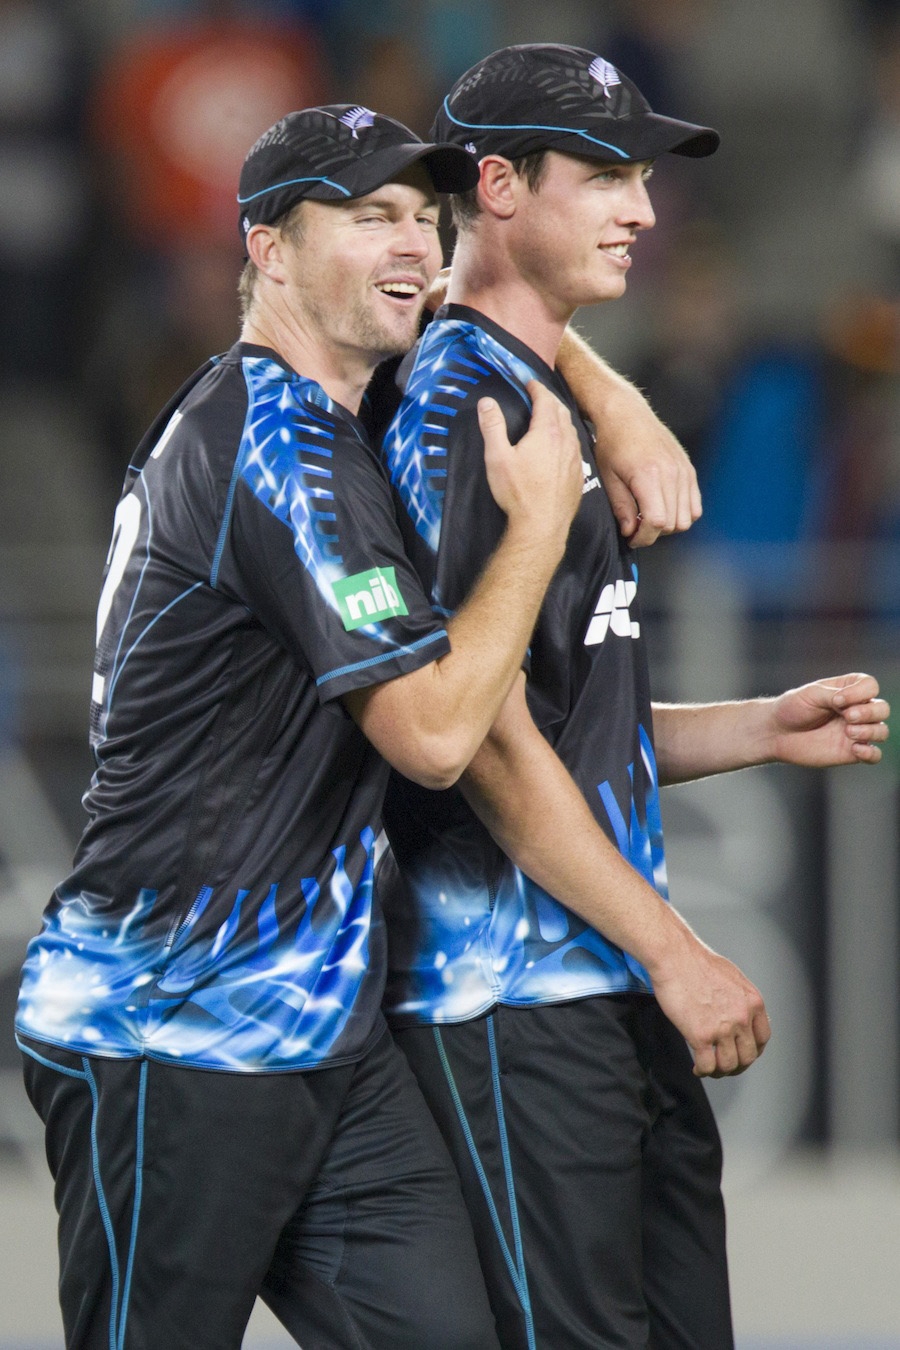 New Zealandâ€™s Adam Milne and Colin Munro celebrate defeating the West Indies in the Twenty-20 International Cricket Match at Eden Park in Auckland, New Zealand on Saturday.